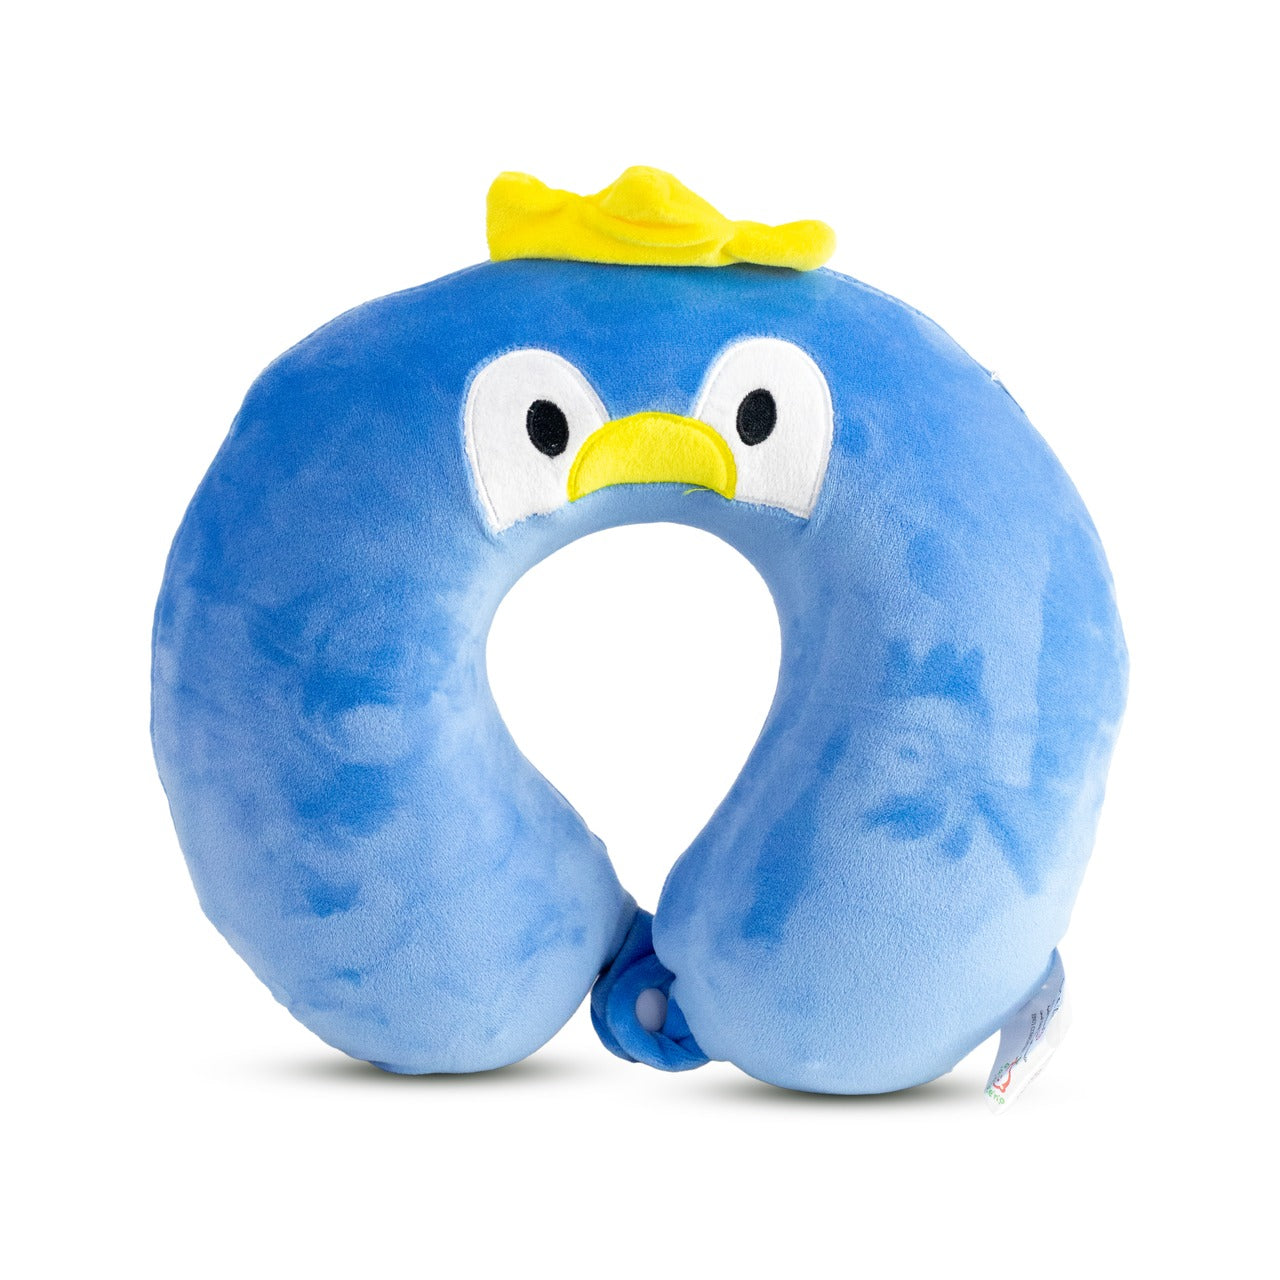 Soft Memory Form Kids Neck Pillow For Travel | Cute Cartoon Printed Neck Rest Cushion